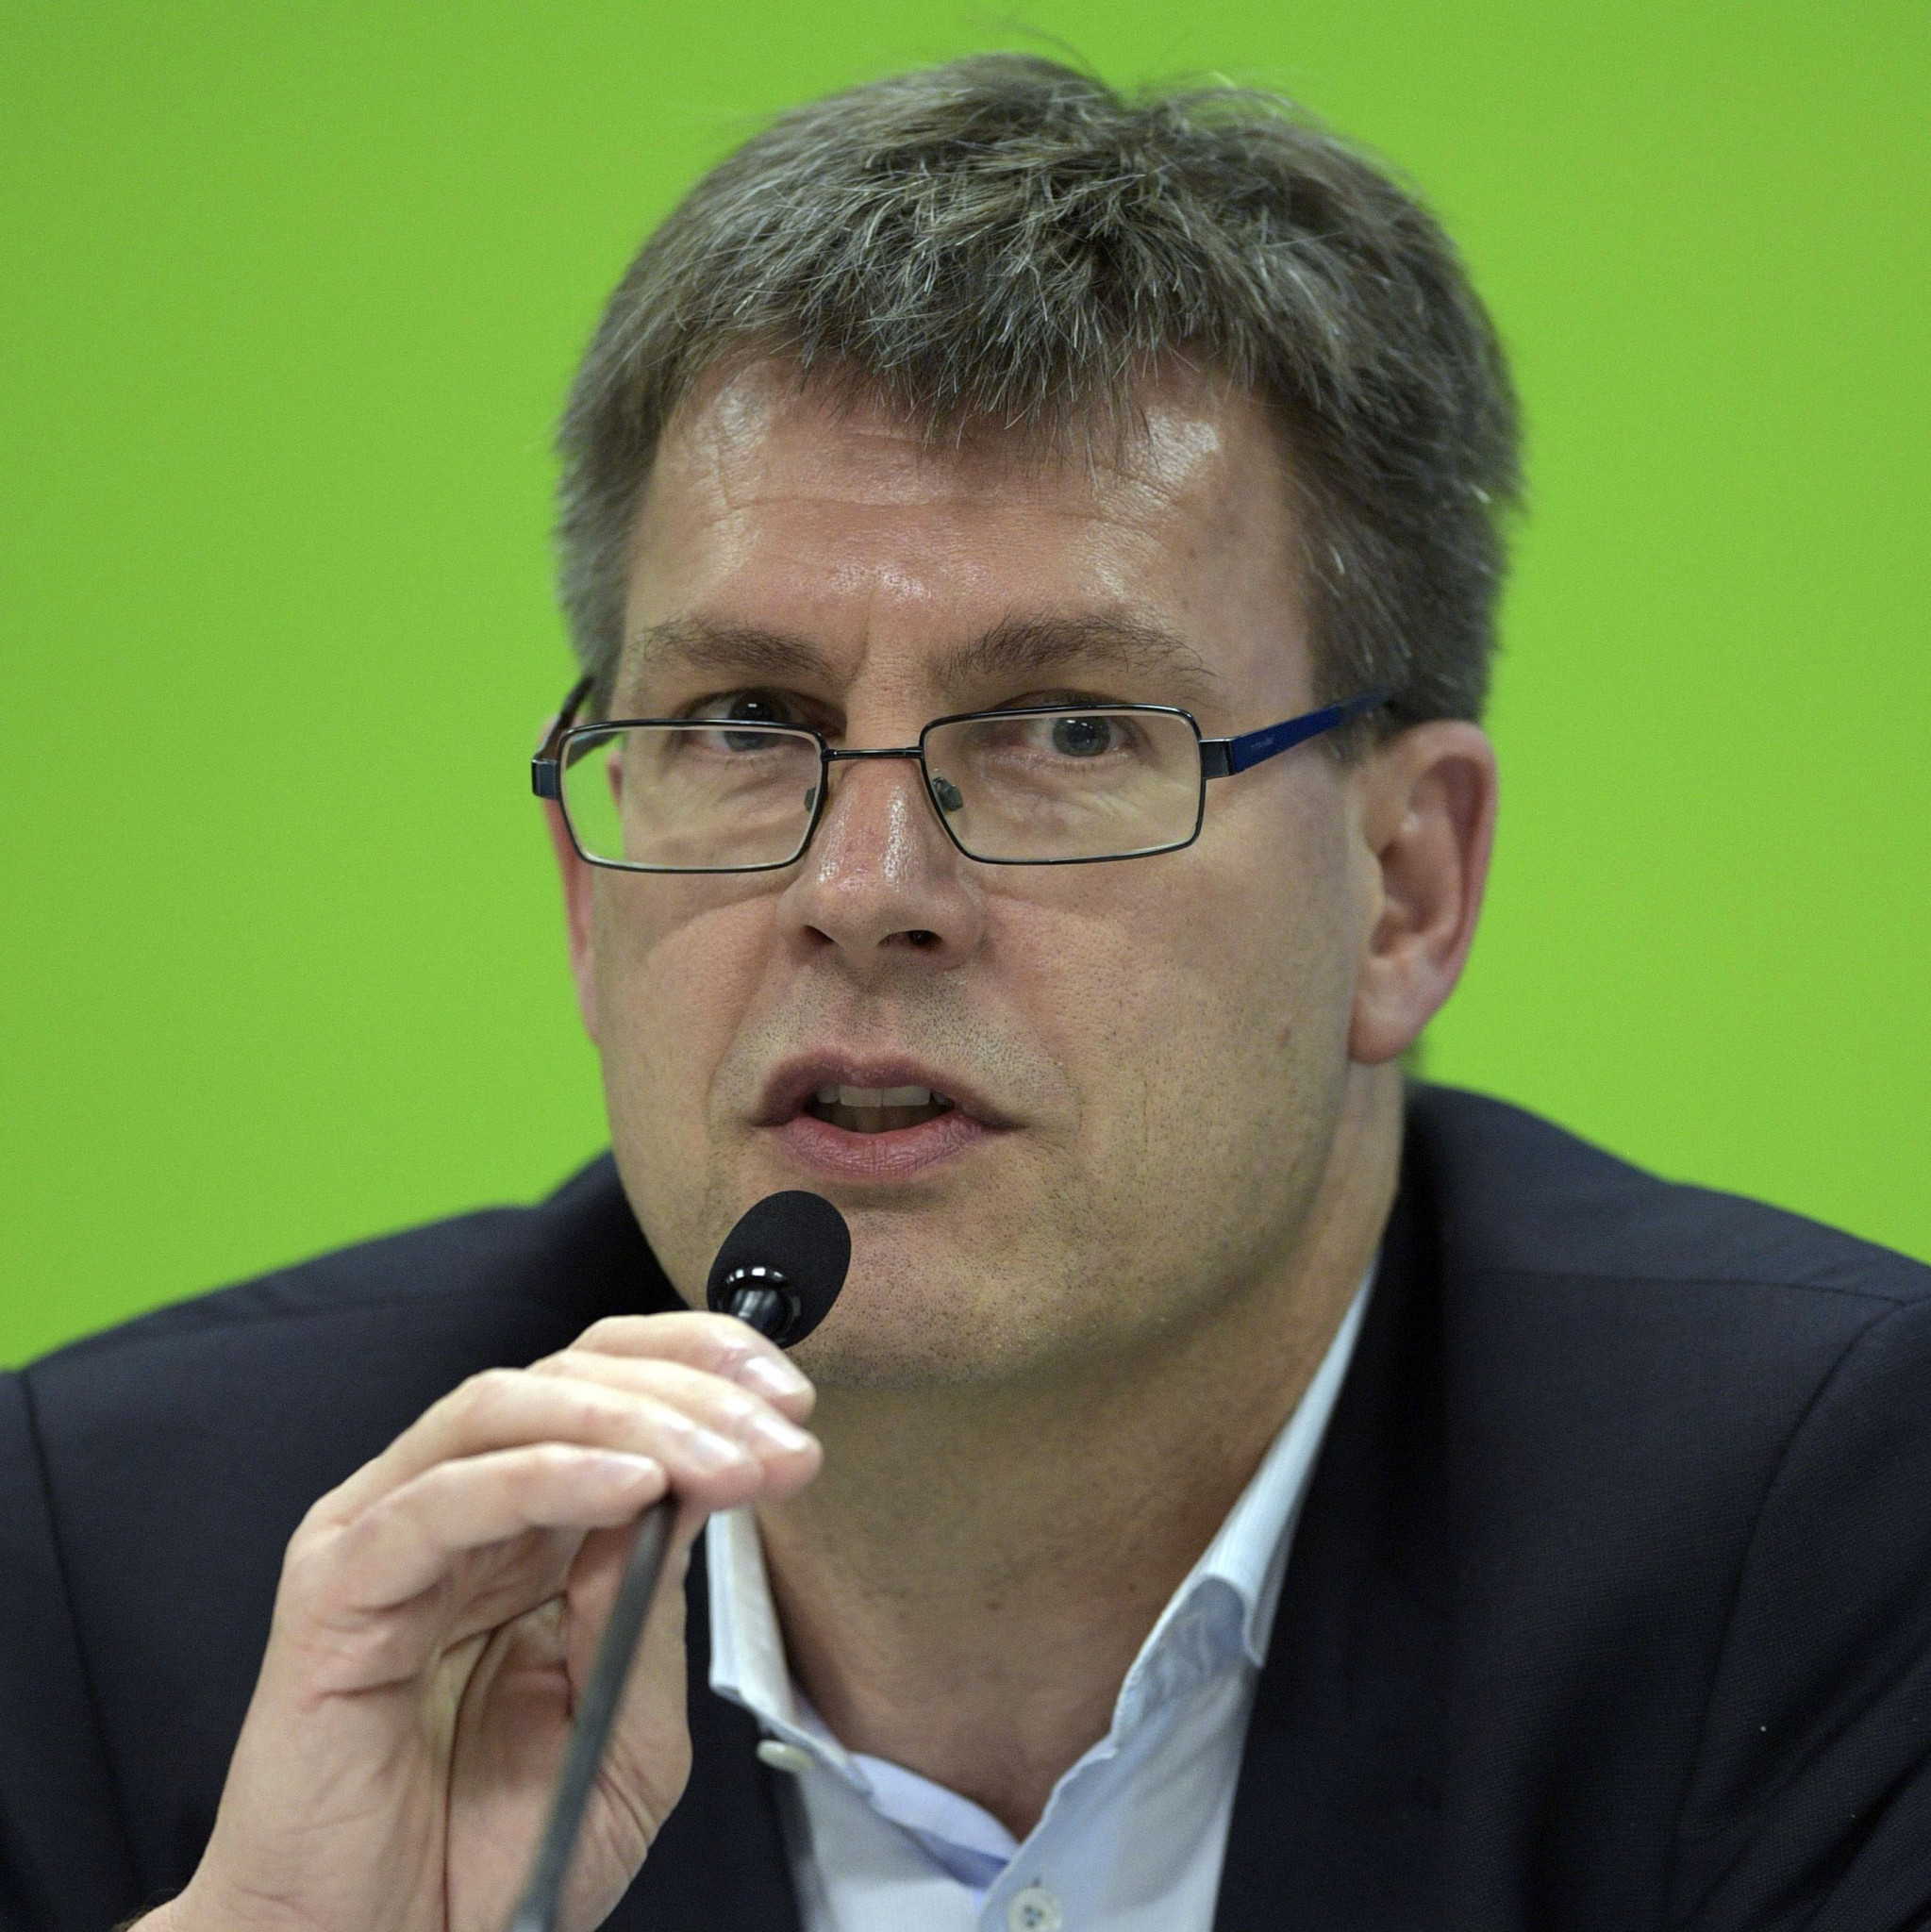 ITTF President Thomas Weikert is set to seek re-election at the ITTF AGM in September ©Getty Images